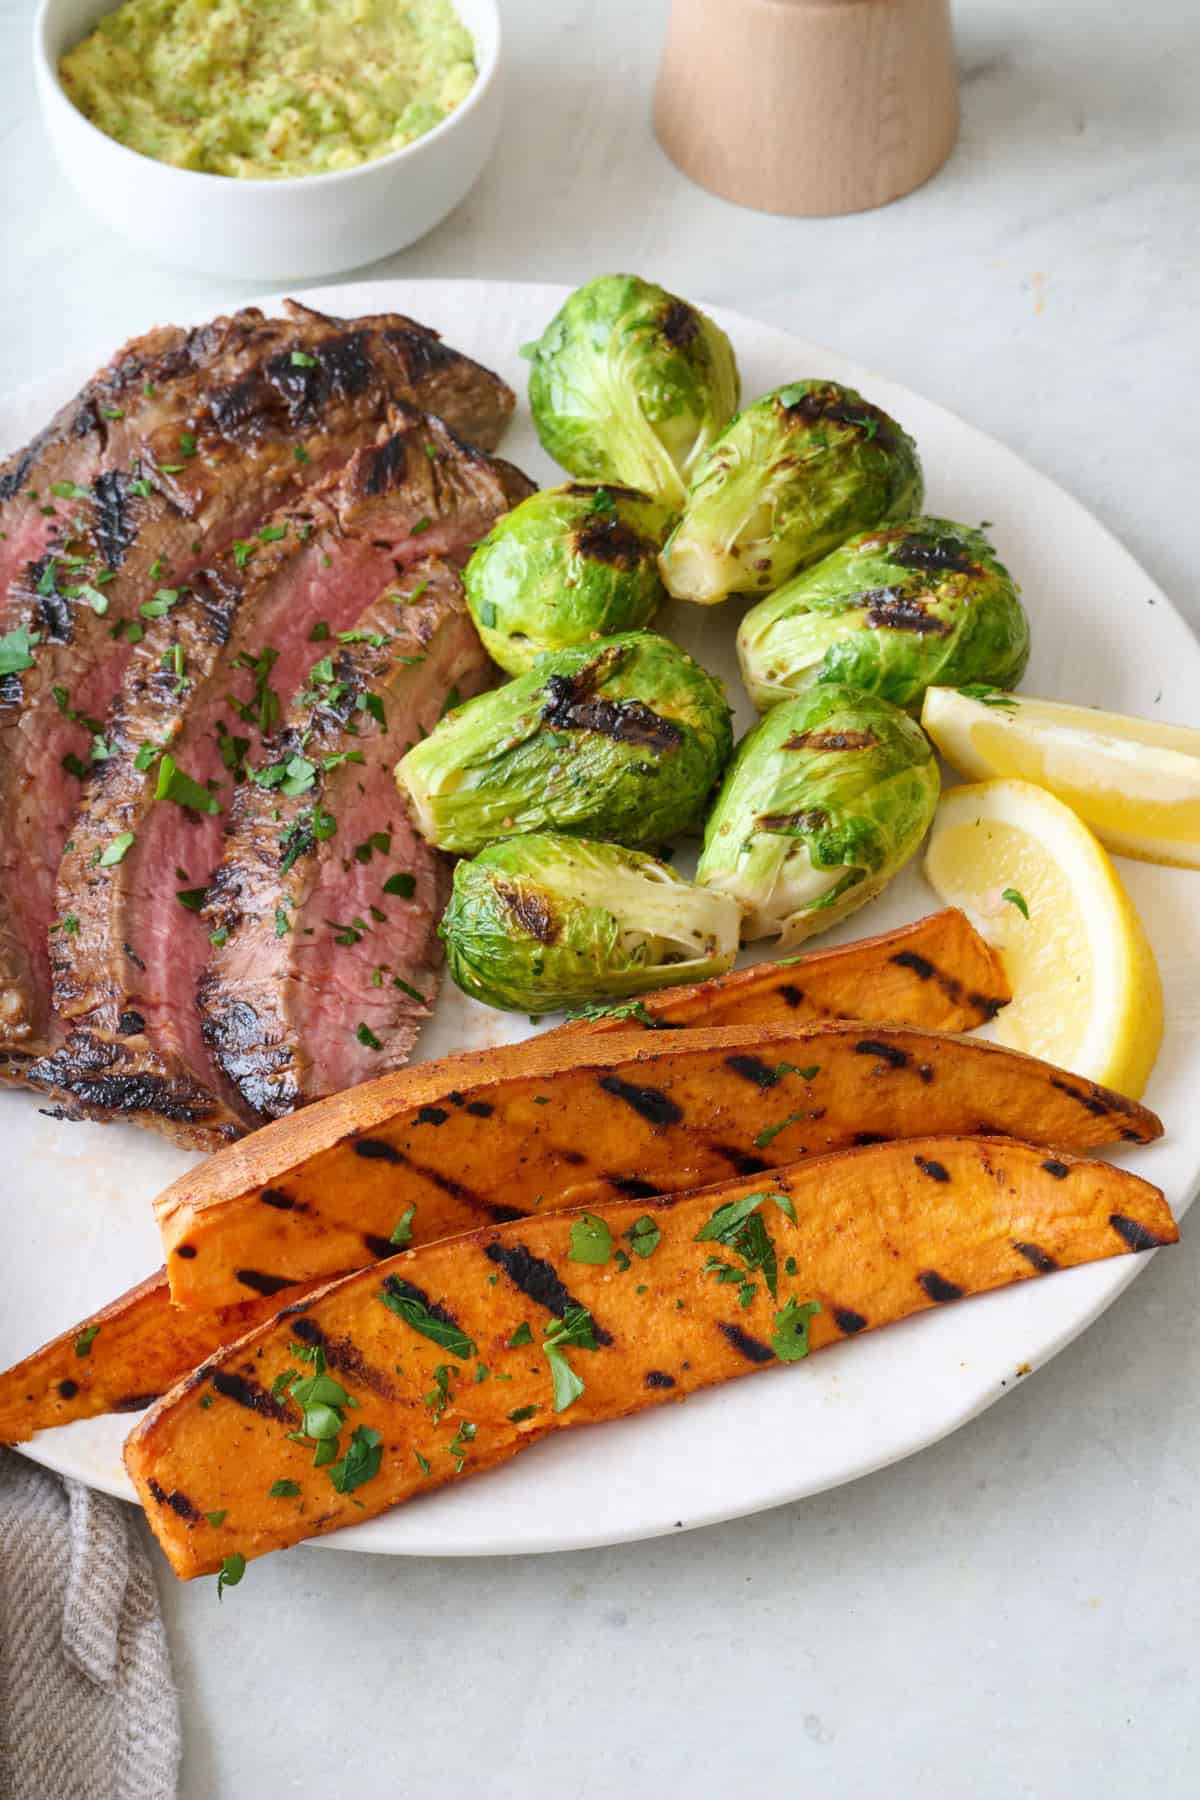 Grilled sweet potato wedges on a plate with sliced grilled steak and brussel sprouts.